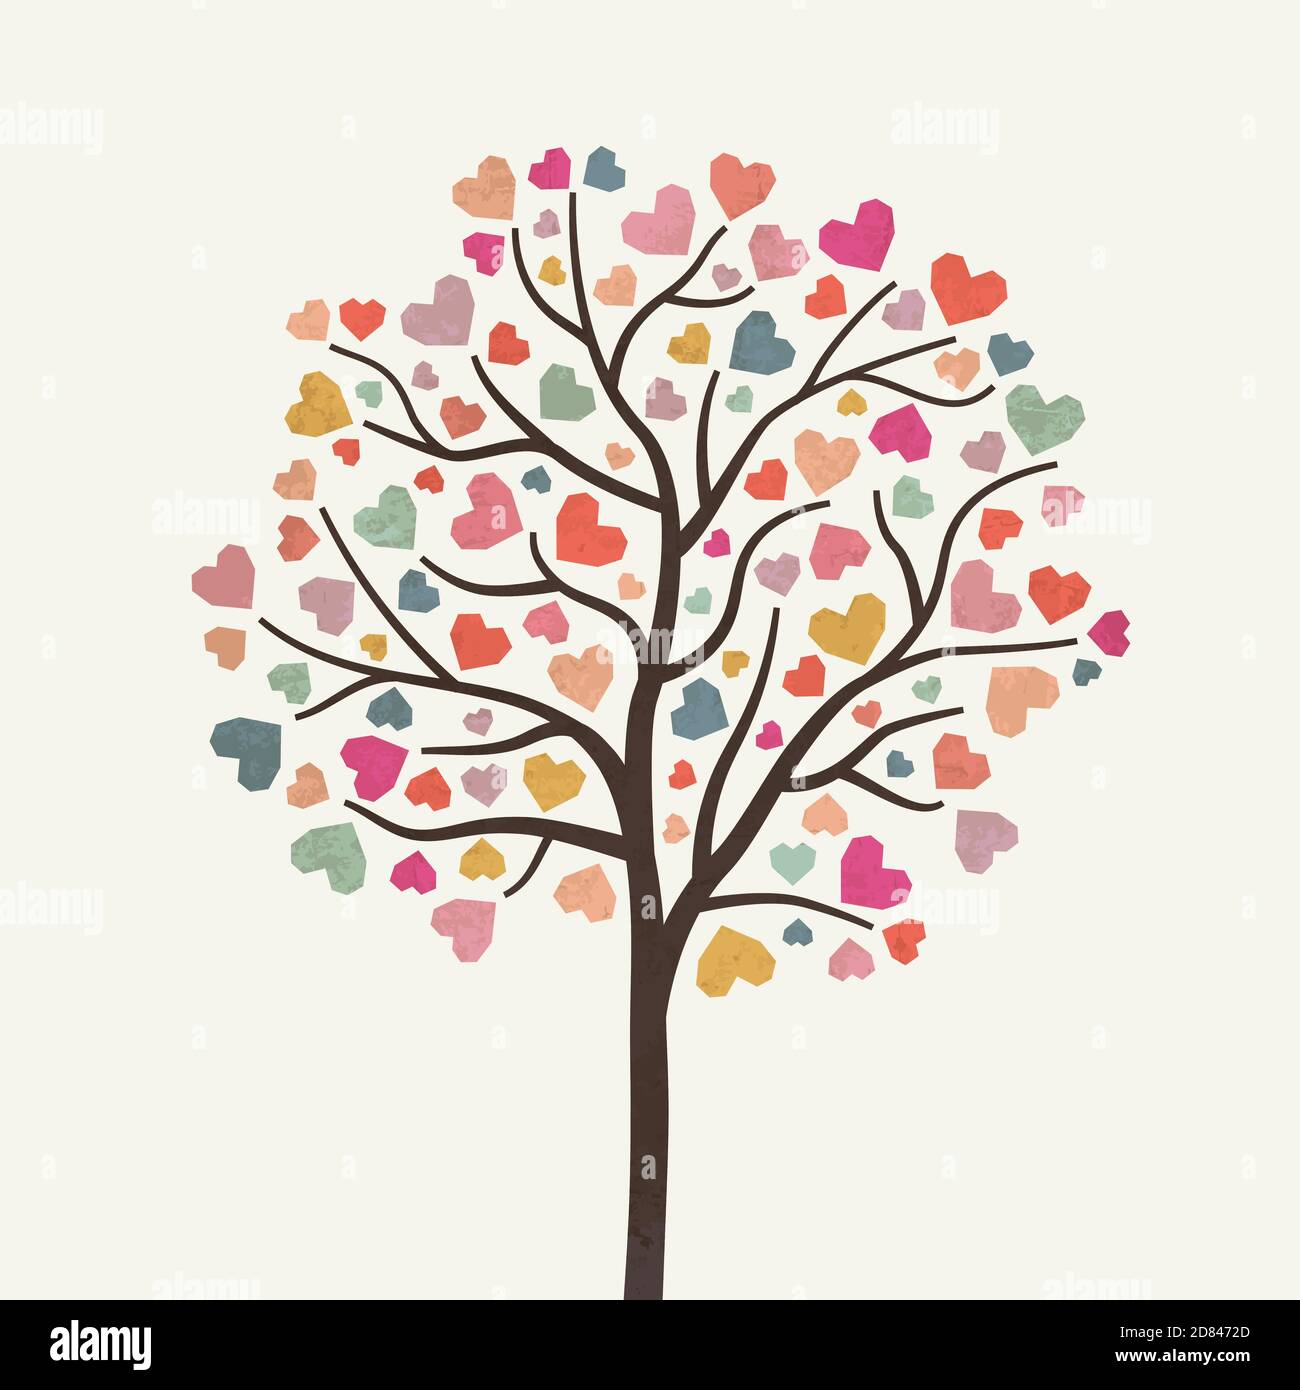 Charity illustration with tree created by hearts. Charity care, help. Donate, giving money. Vector illustration, flat style design. Stock Vector